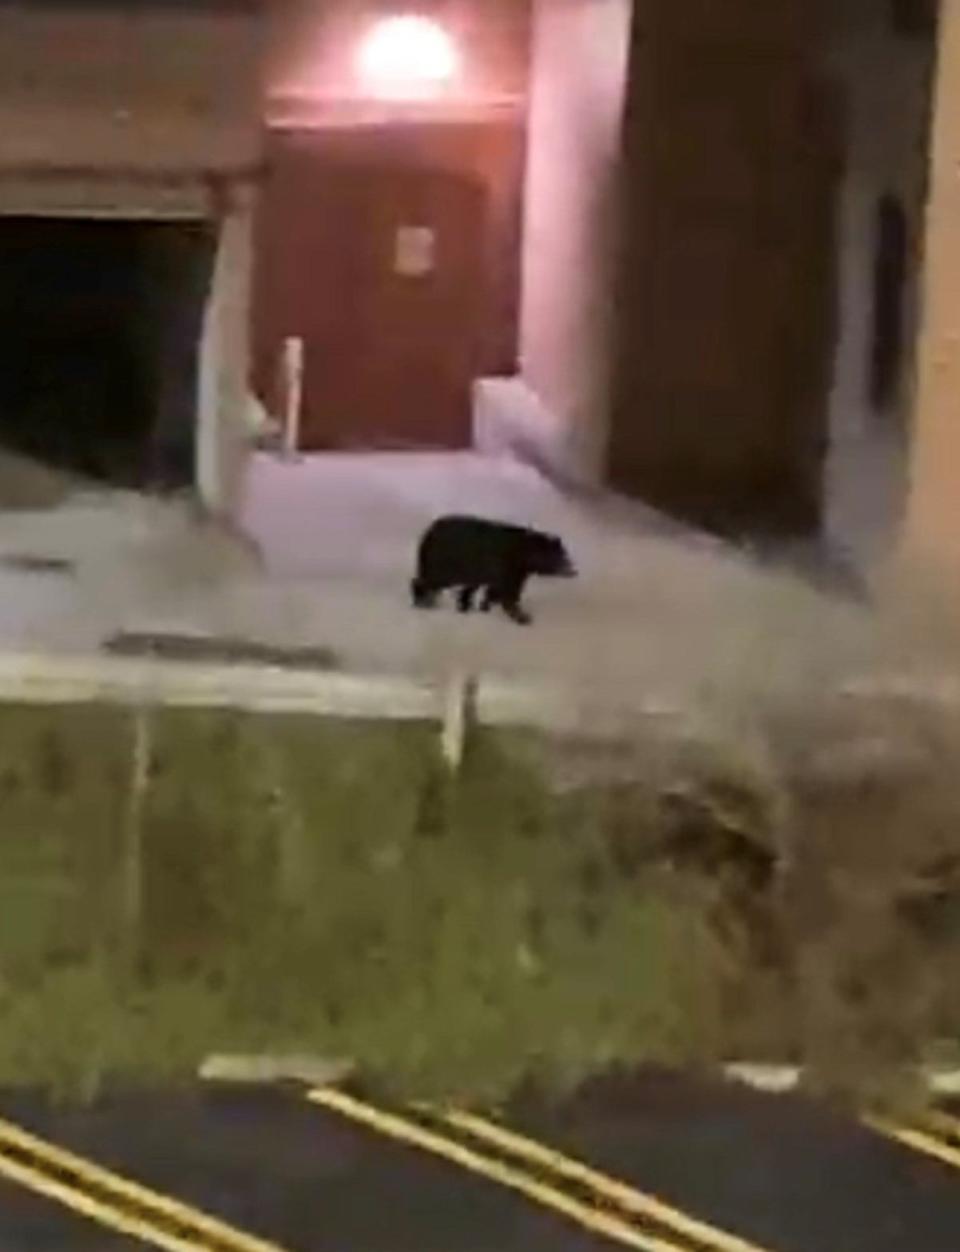 A bear was spotted in downtown Knoxville on Dec. 12, 2022.